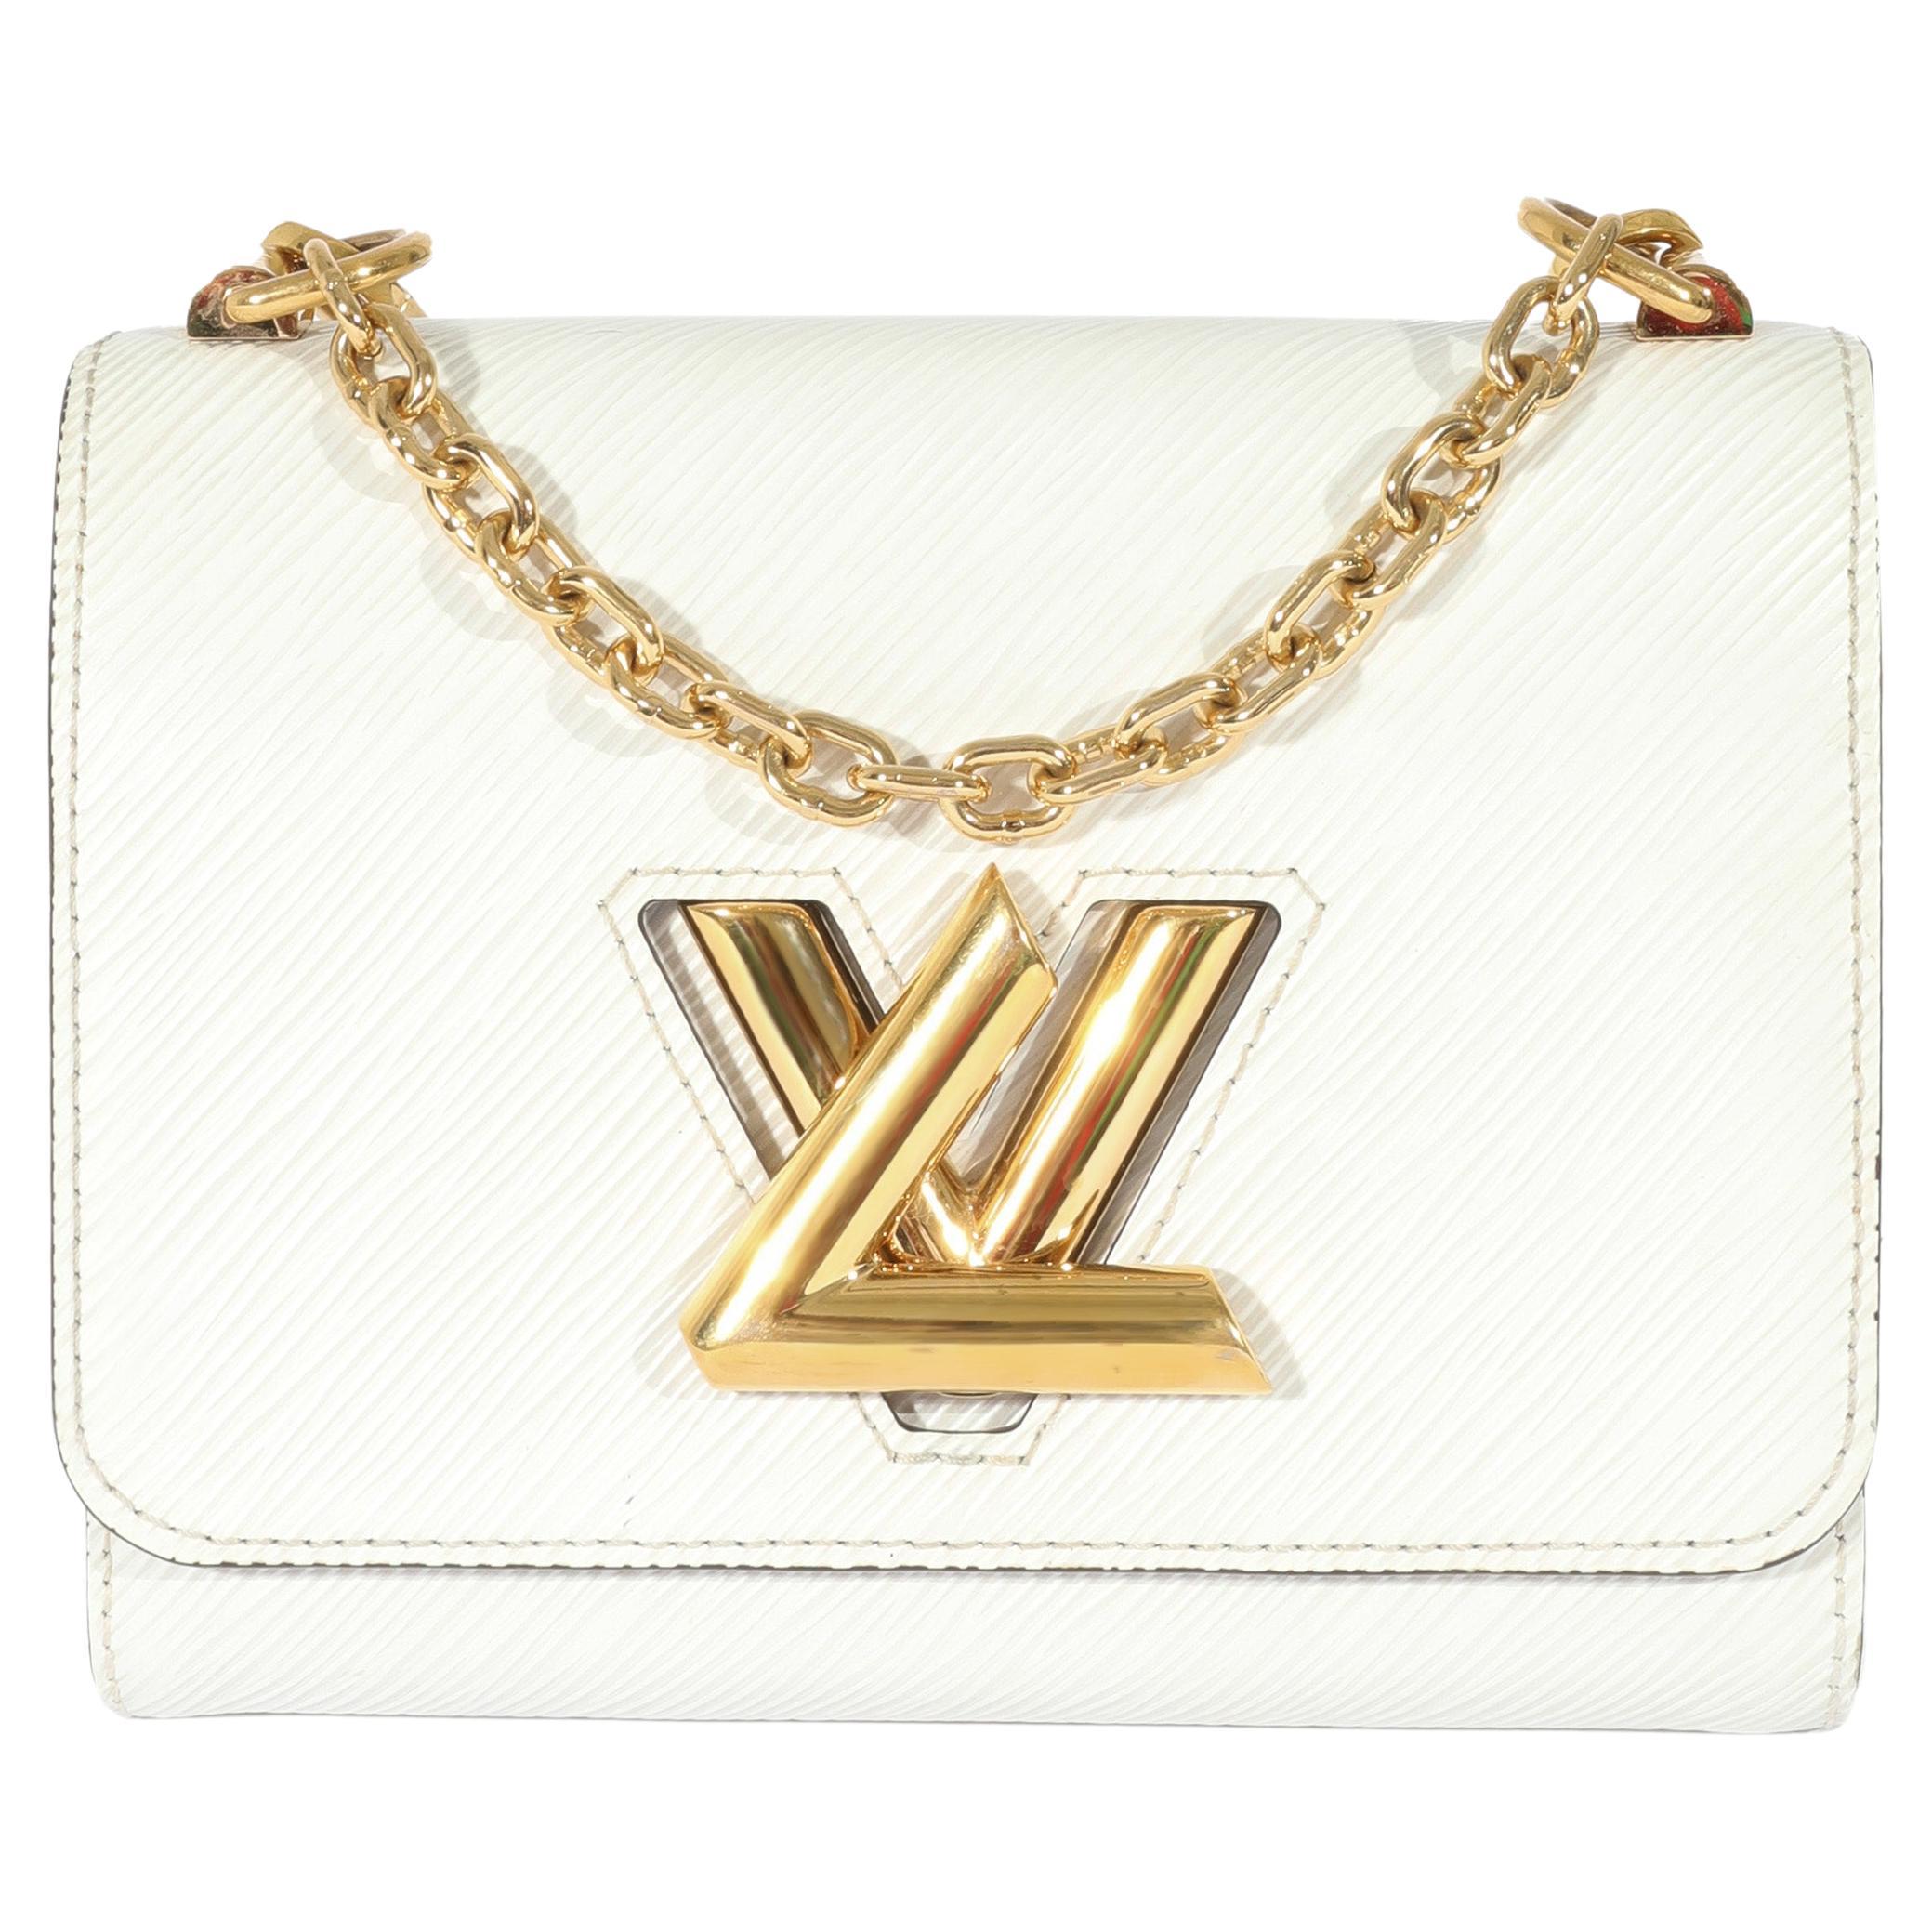 Vintage Louis Vuitton: Bags, Clothing & More - 7,849 For Sale at 